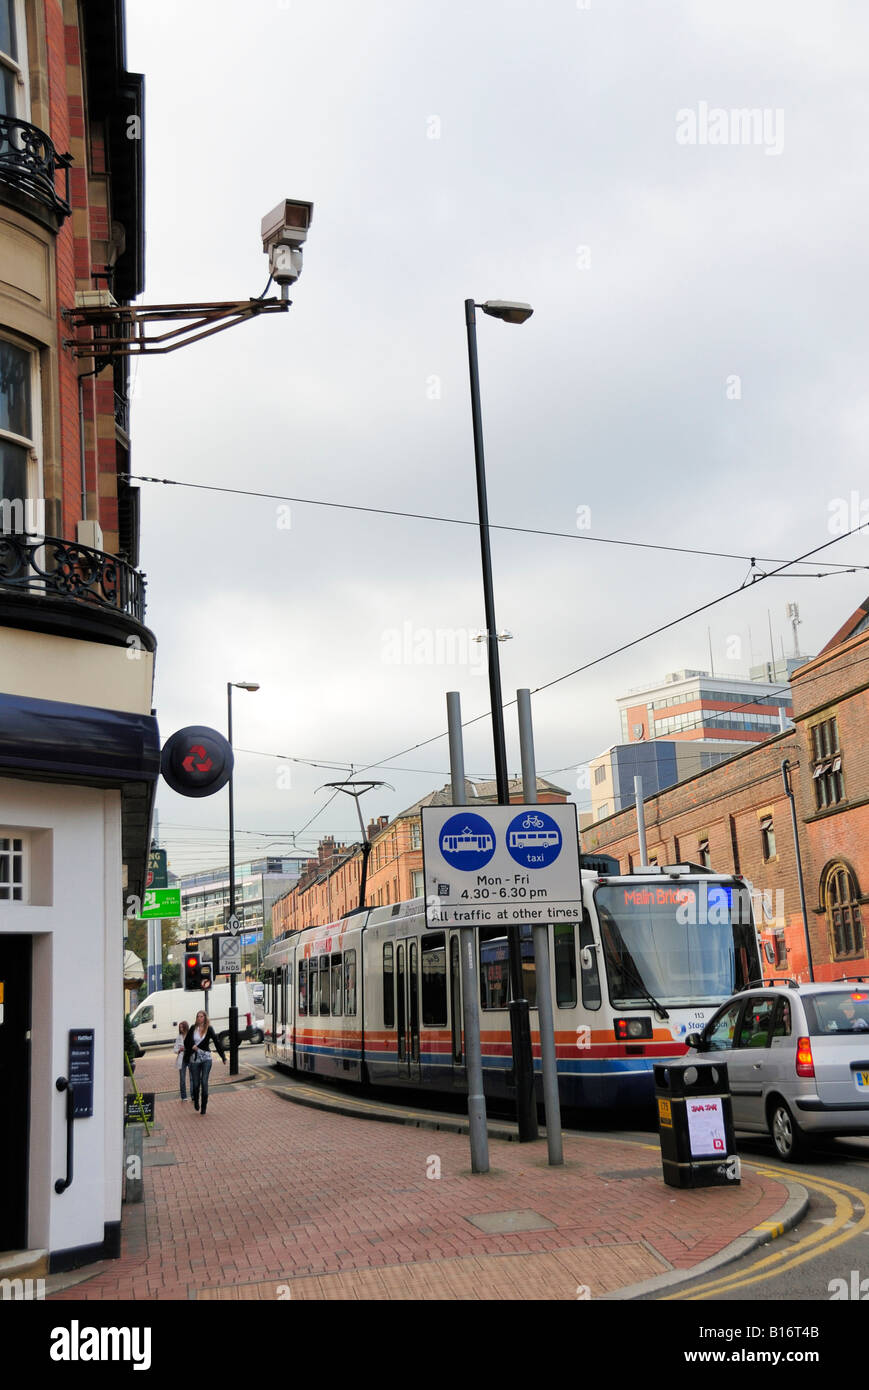 Street Furniture & Traffic Surveillance Camera located on main supertram route in busy city centre Stock Photo